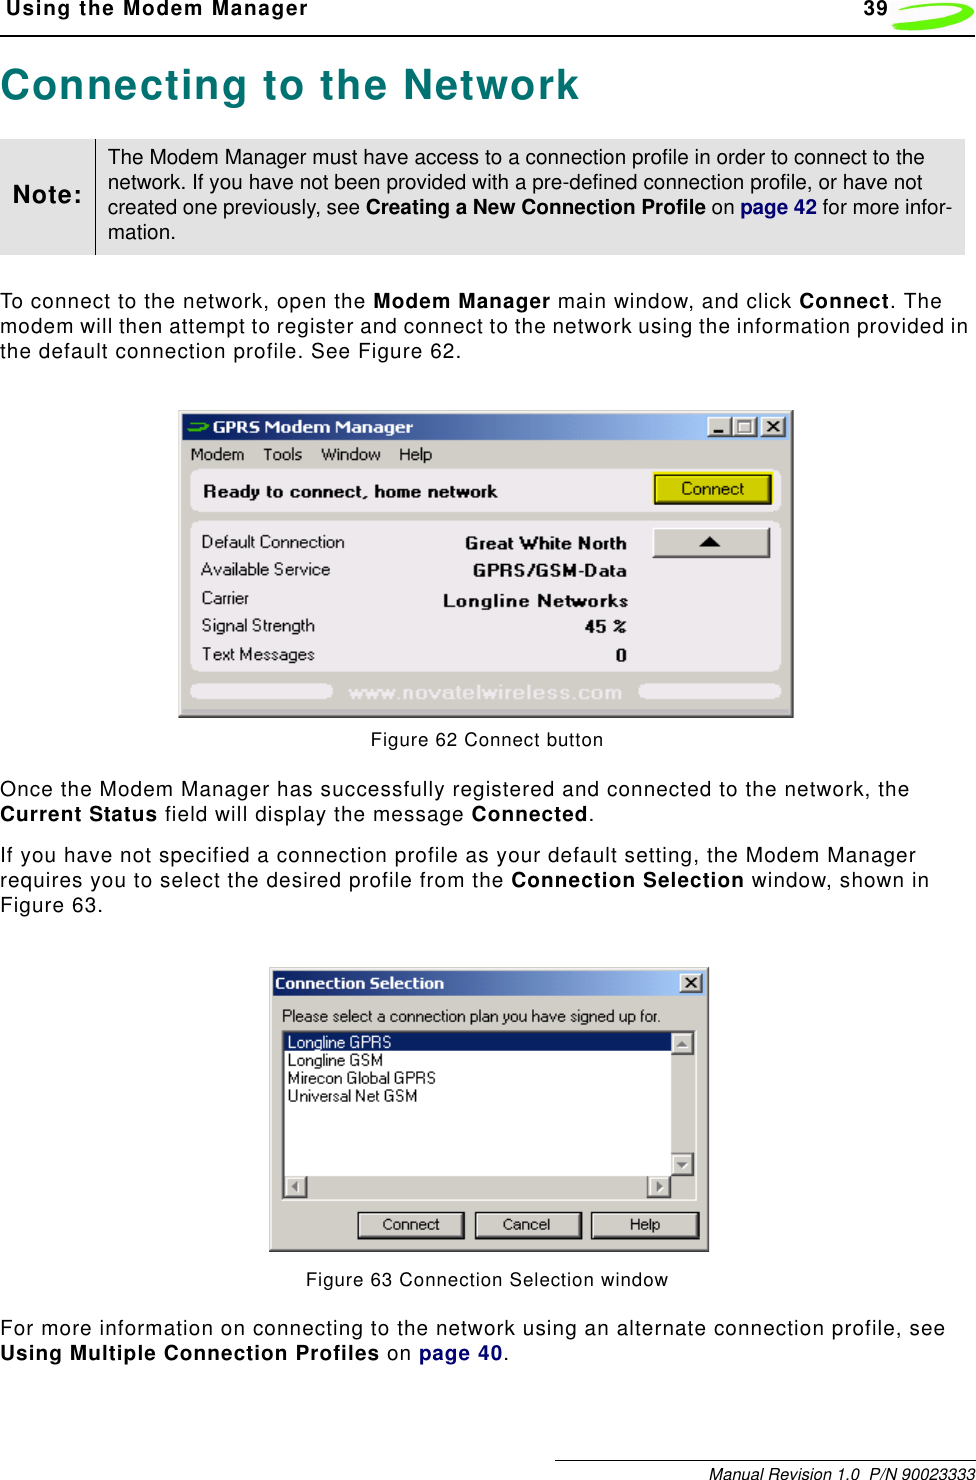  Using the Modem Manager 39Manual Revision 1.0  P/N 90023333Connecting to the NetworkTo connect to the network, open the Modem Manager main window, and click Connect. The modem will then attempt to register and connect to the network using the information provided in the default connection profile. See Figure 62. Figure 62 Connect buttonOnce the Modem Manager has successfully registered and connected to the network, the Current Status field will display the message Connected.If you have not specified a connection profile as your default setting, the Modem Manager requires you to select the desired profile from the Connection Selection window, shown in Figure 63.Figure 63 Connection Selection windowFor more information on connecting to the network using an alternate connection profile, see Using Multiple Connection Profiles on page 40.Note:The Modem Manager must have access to a connection profile in order to connect to the network. If you have not been provided with a pre-defined connection profile, or have not created one previously, see Creating a New Connection Profile on page 42 for more infor-mation.